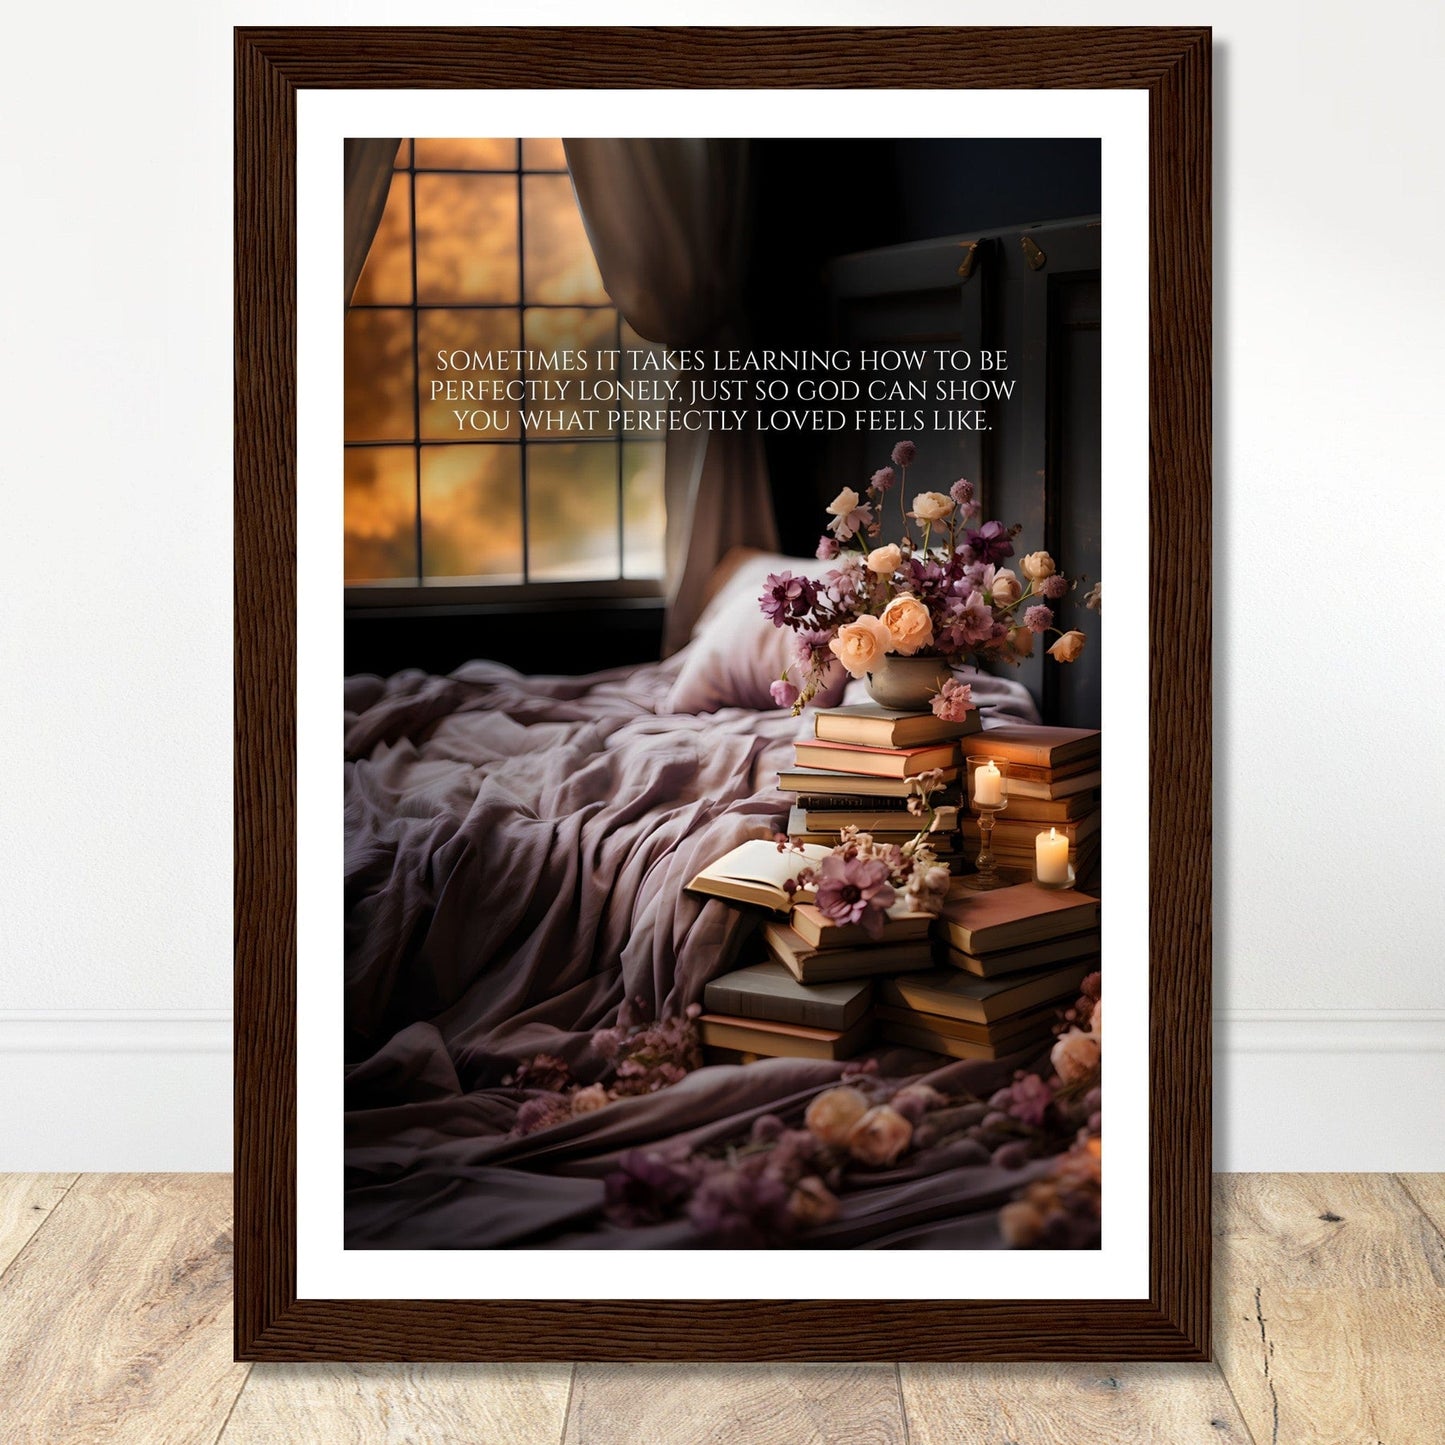 Coffee With My Father Print Material A4 21x29.7 cm / 8x12″ / Dark wood frame Framed Template